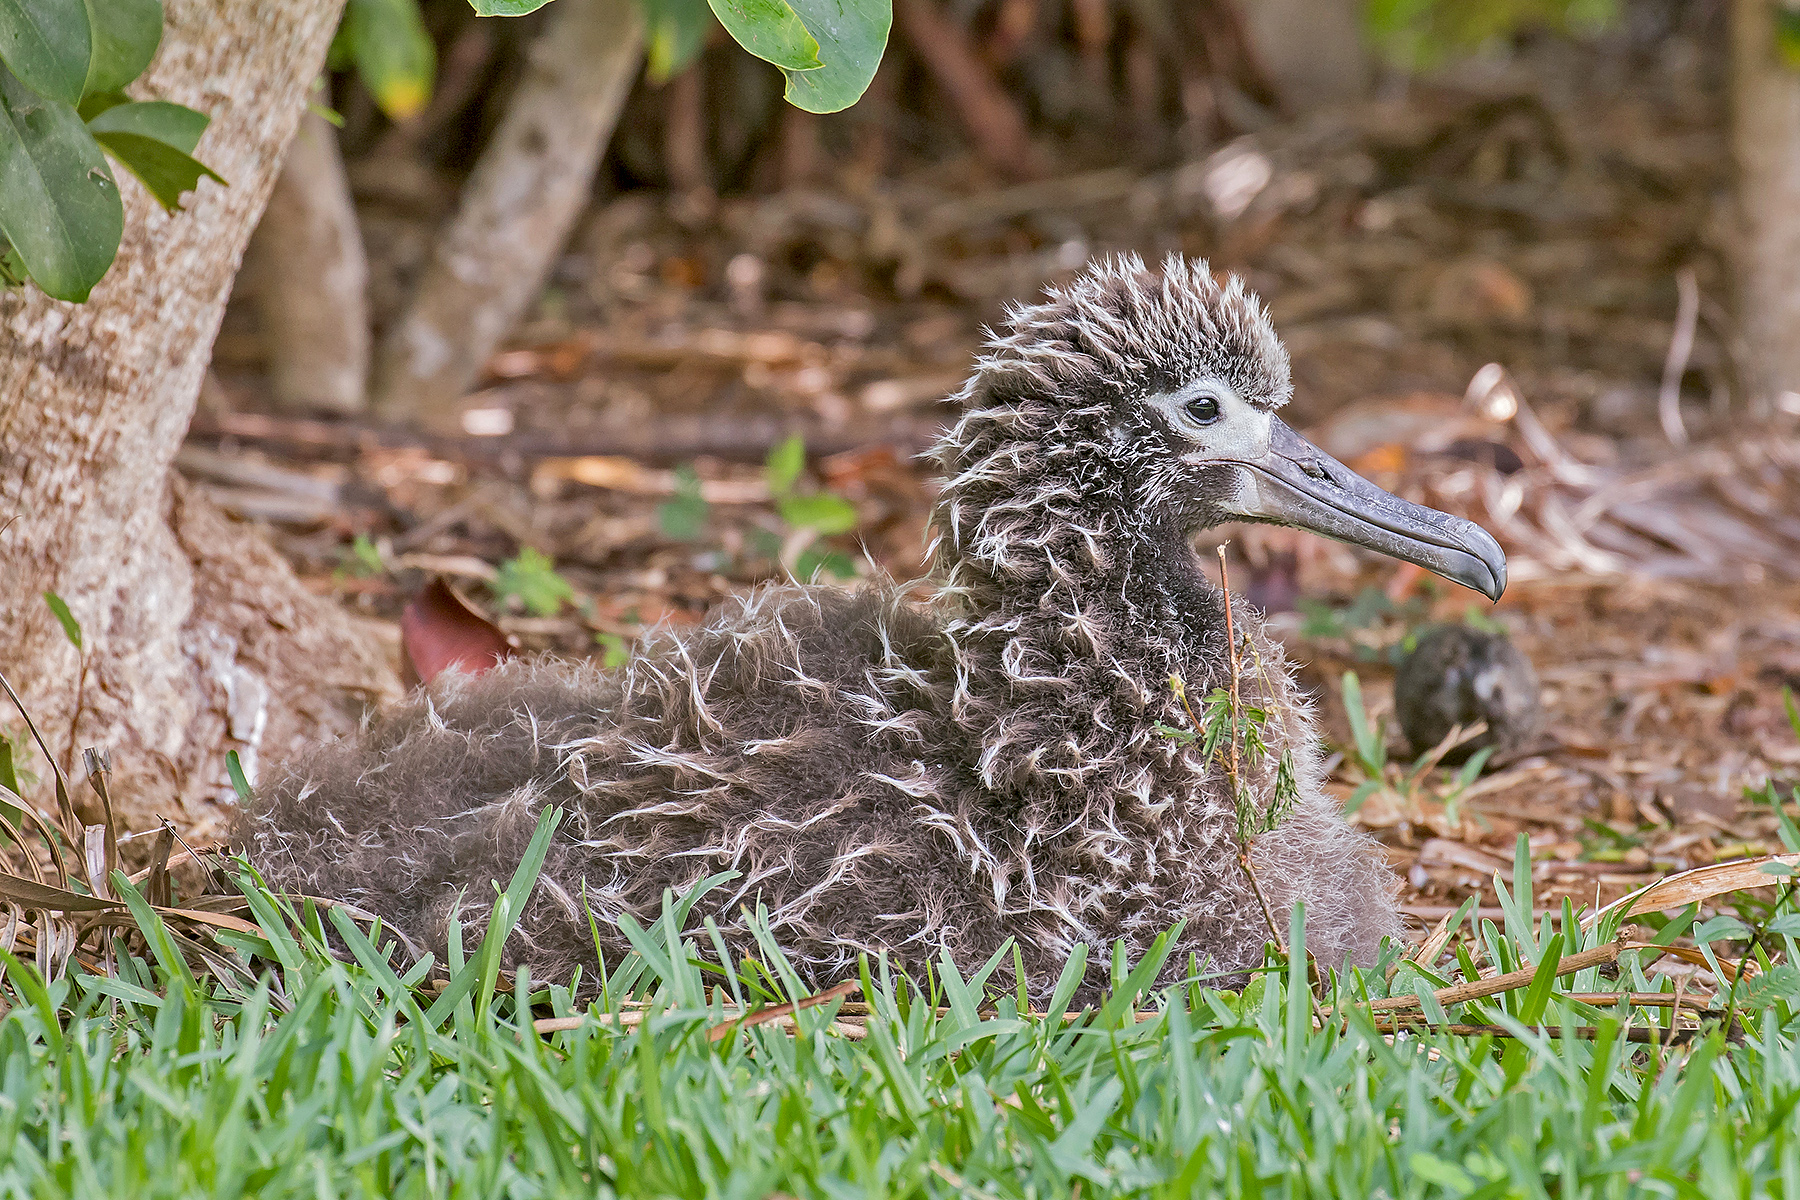 Laysan Albatross chick on our Hawaii birding tour (image by Pete Morris)